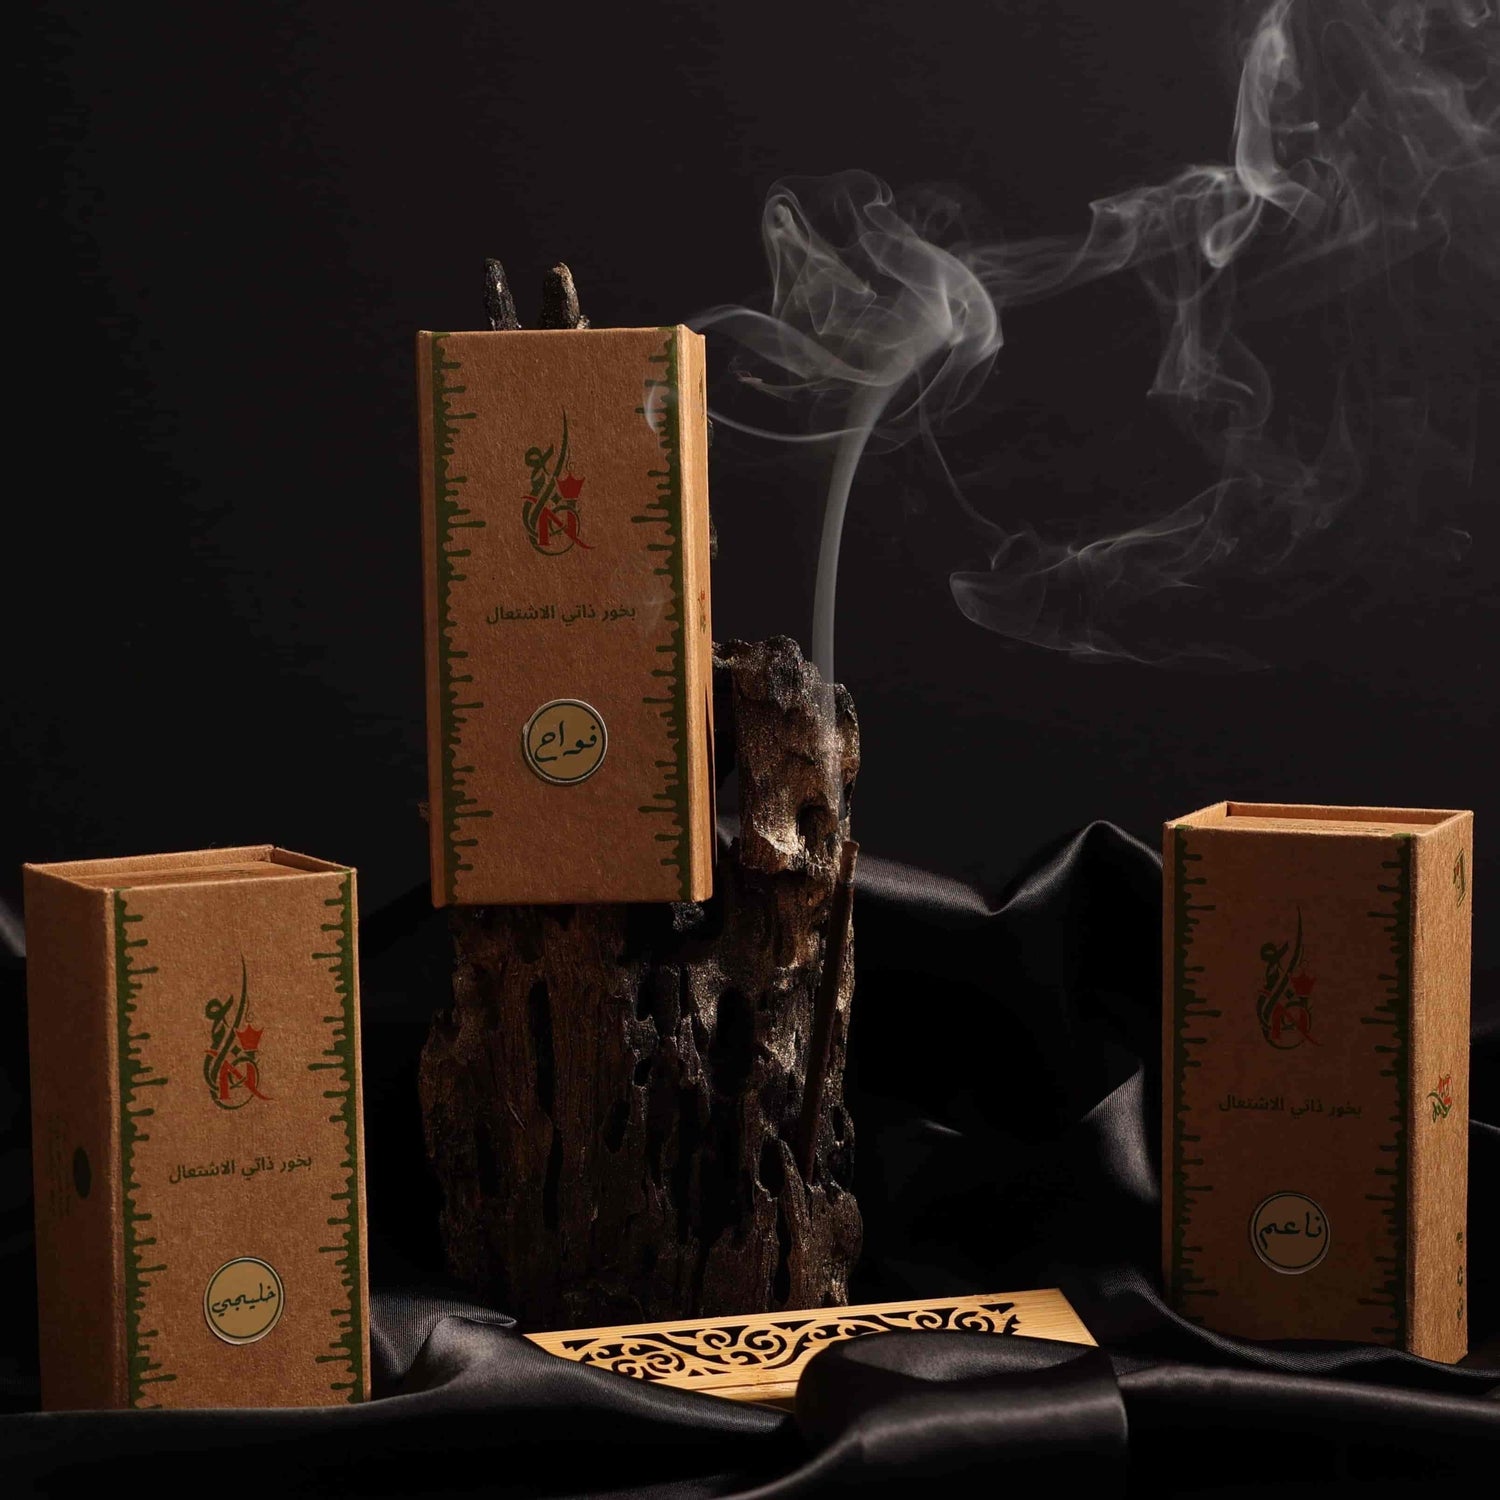 NAO INCENSE homepage Pic where they sell High quality premium Incense.